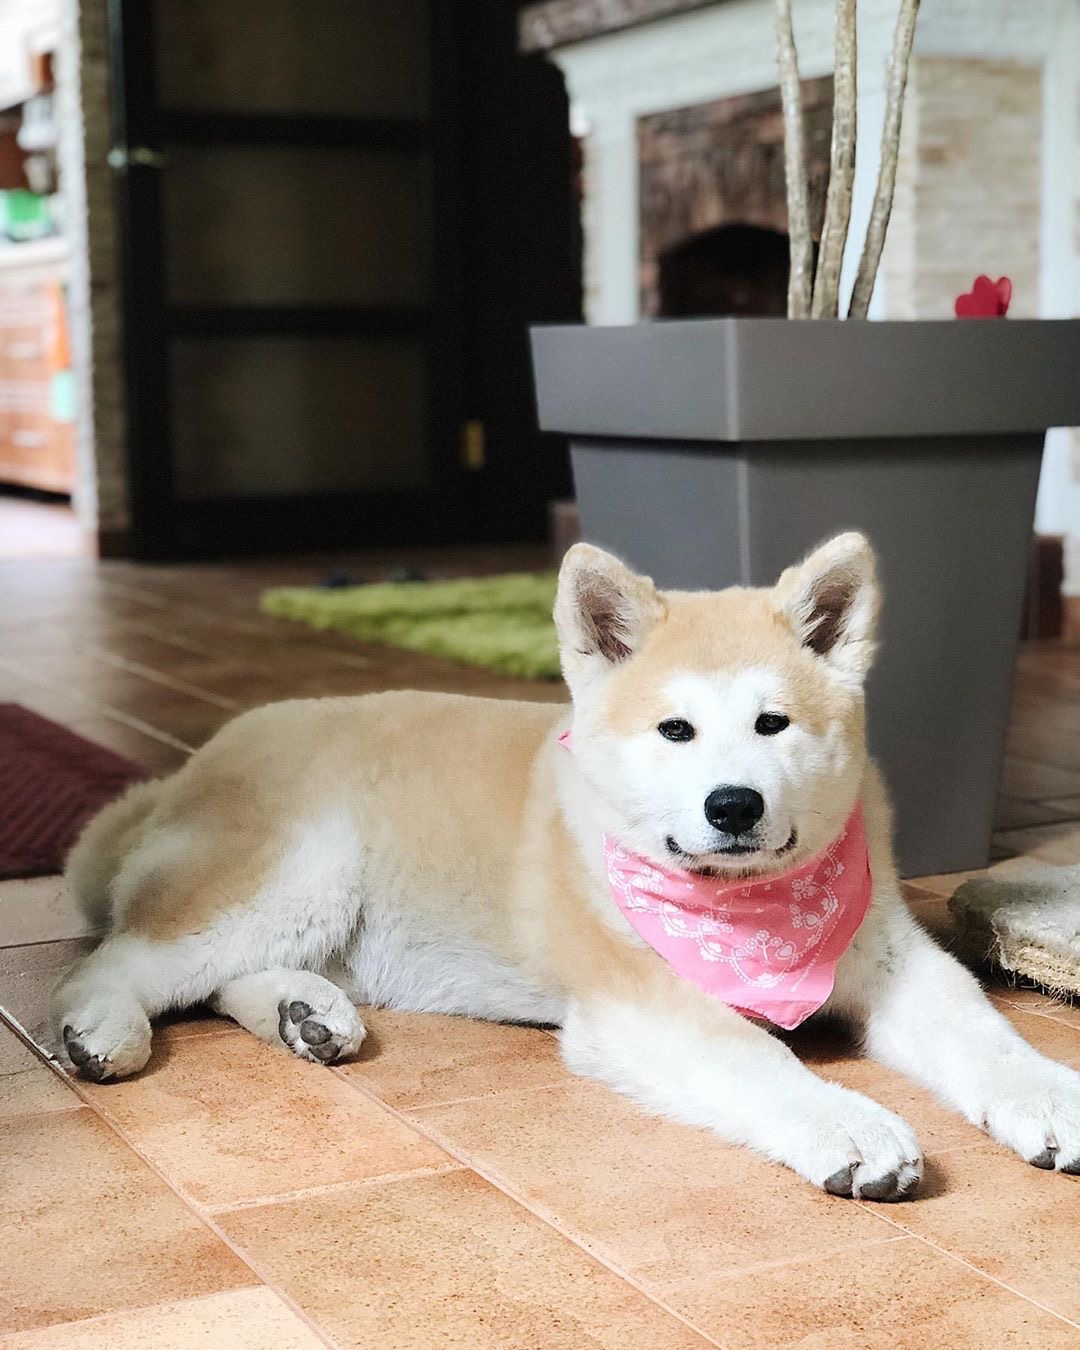 Akita wearing a pink scarf while lying on the floor